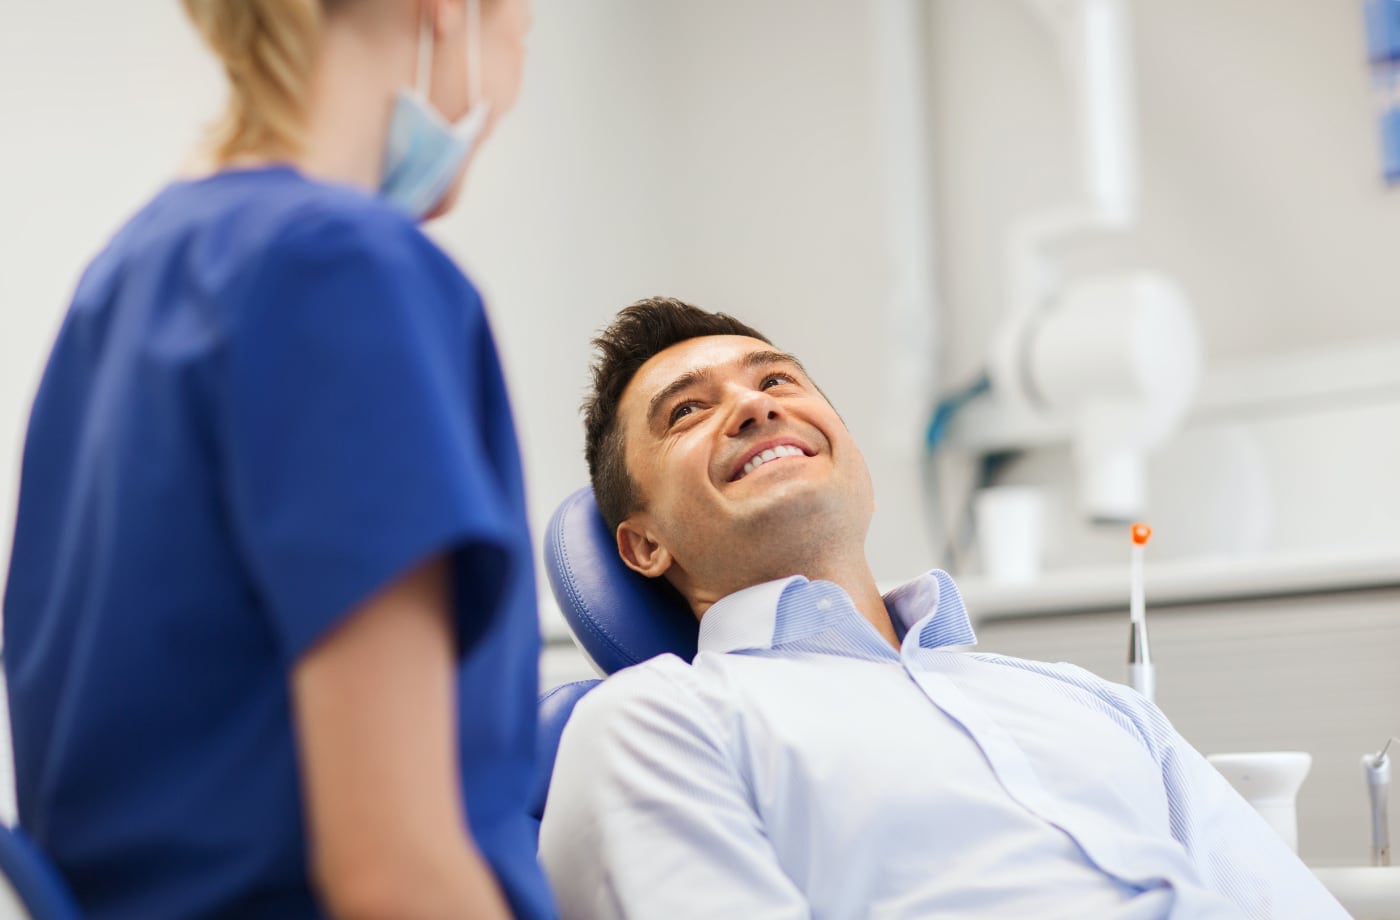 When Tooth Trouble Strikes: Tips for Finding an Emergency Dentist